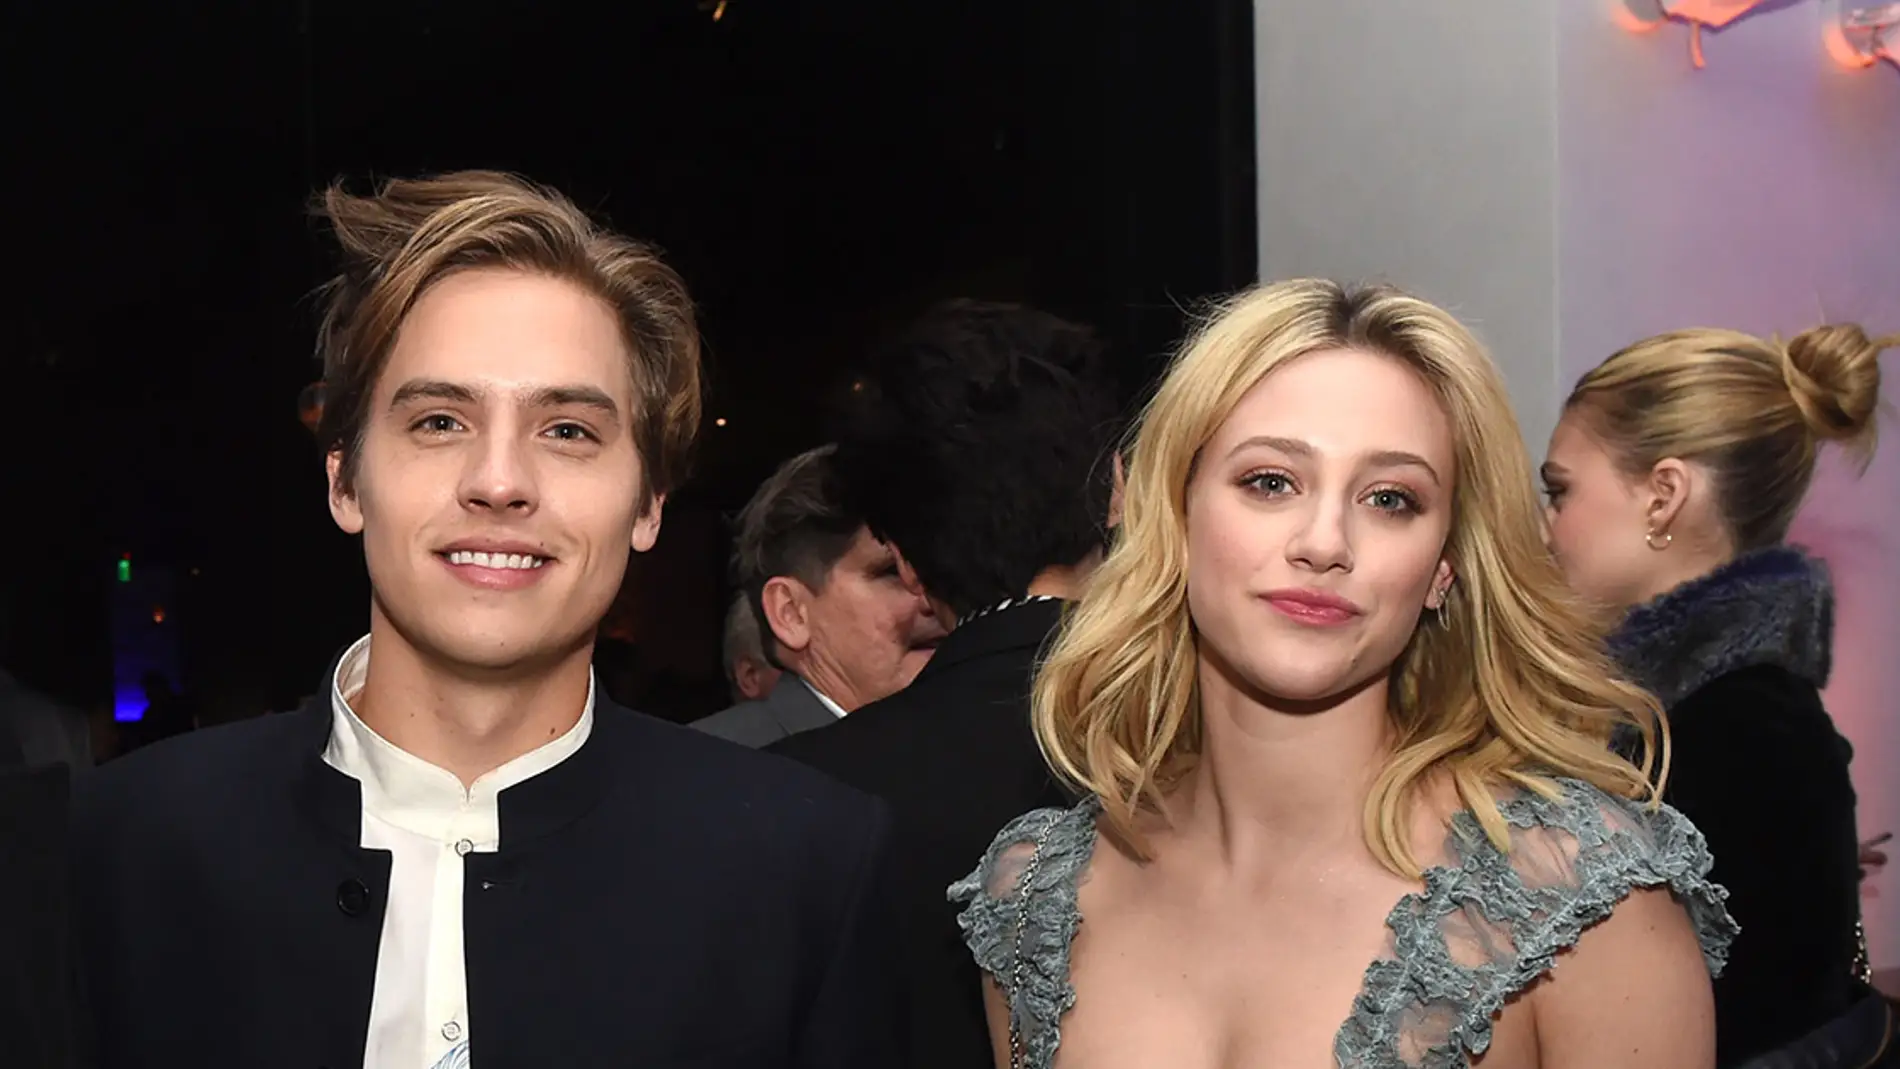 Dylan Sprouse y Lili Reinhart